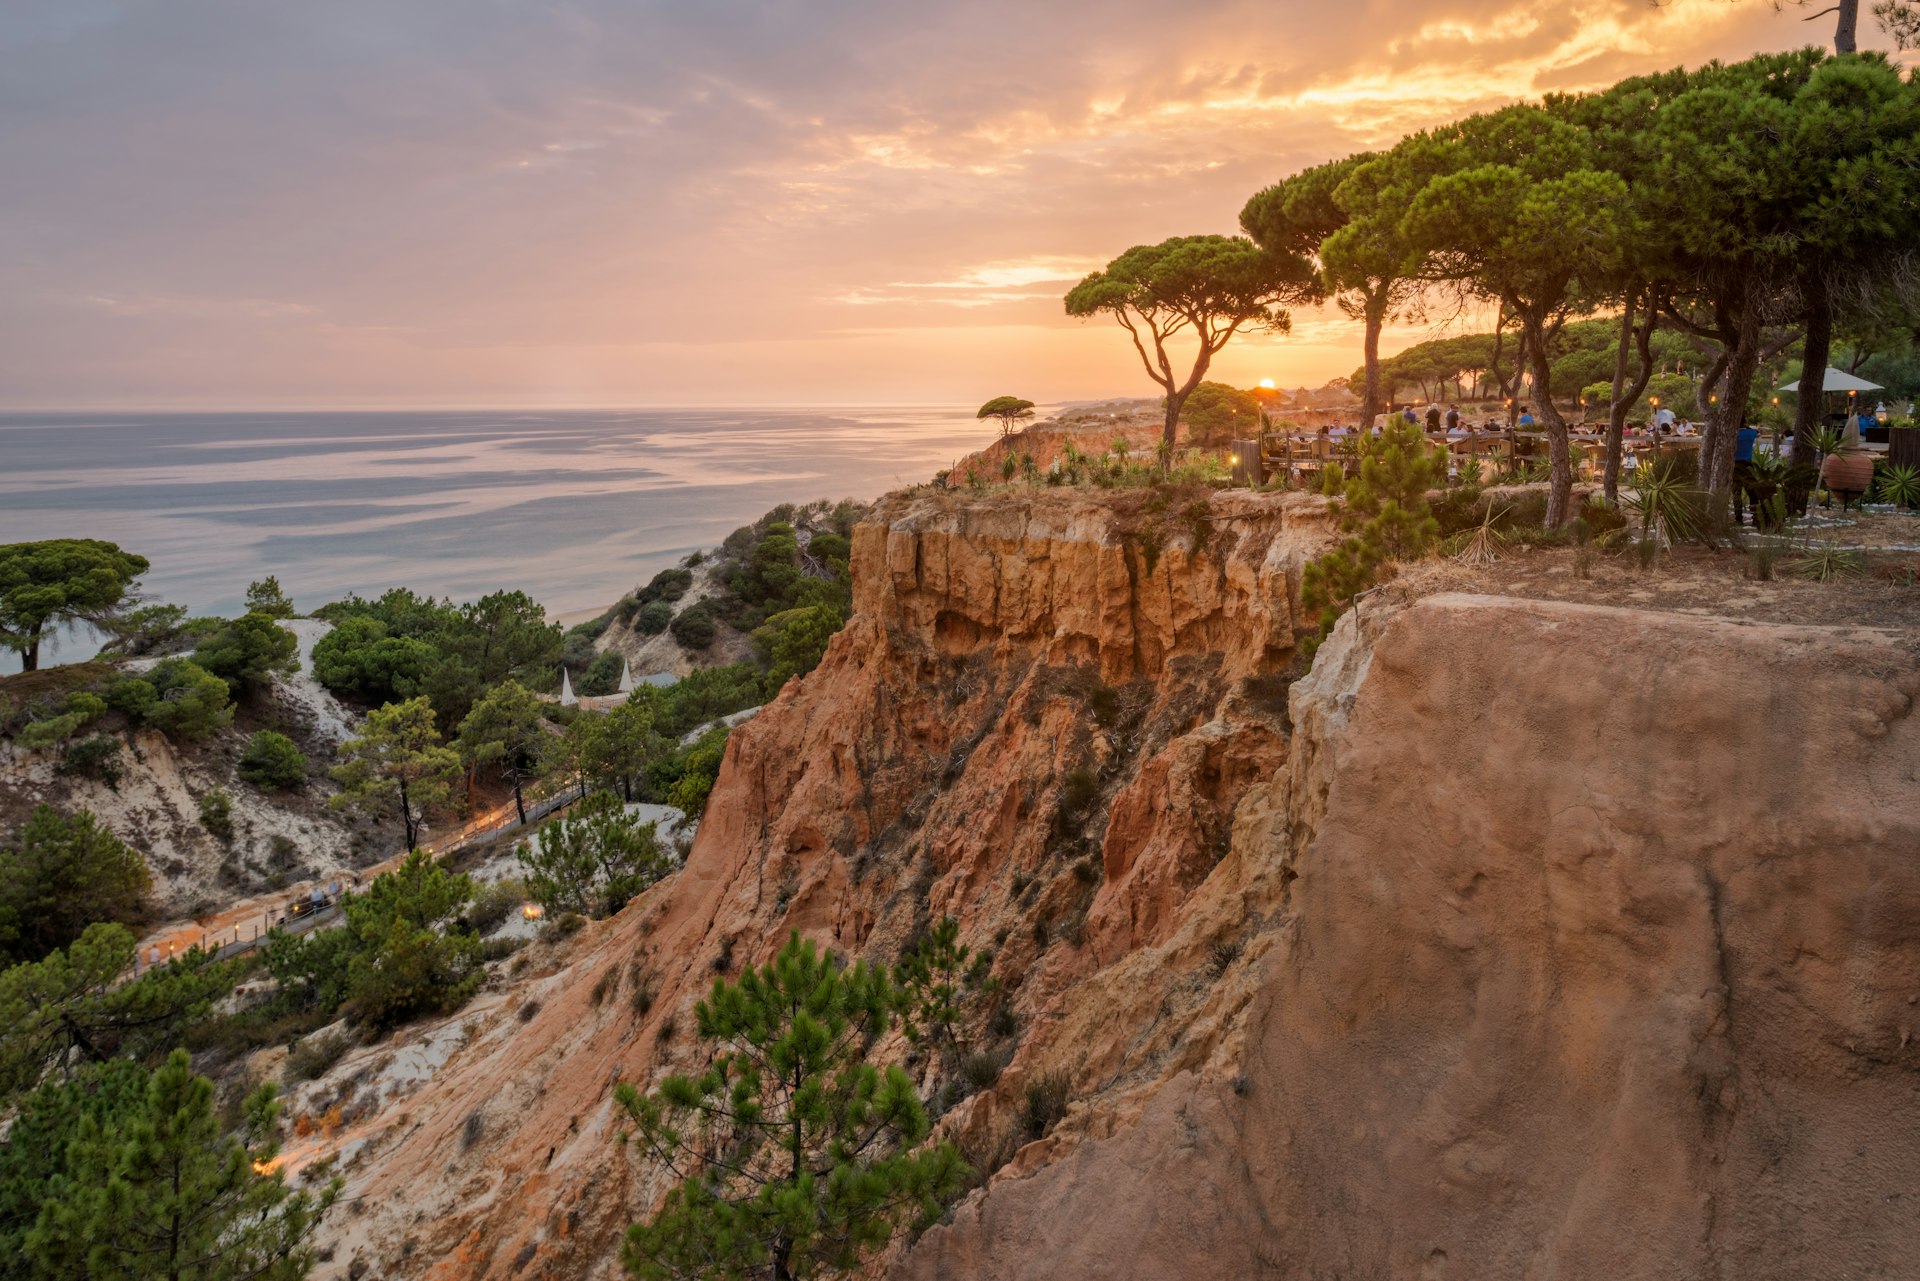 Dinner guests at the Pine Cliffs Resort in Mirador sits amongst the trees at the top of the ochre cliffs of Portugal's Algarve region